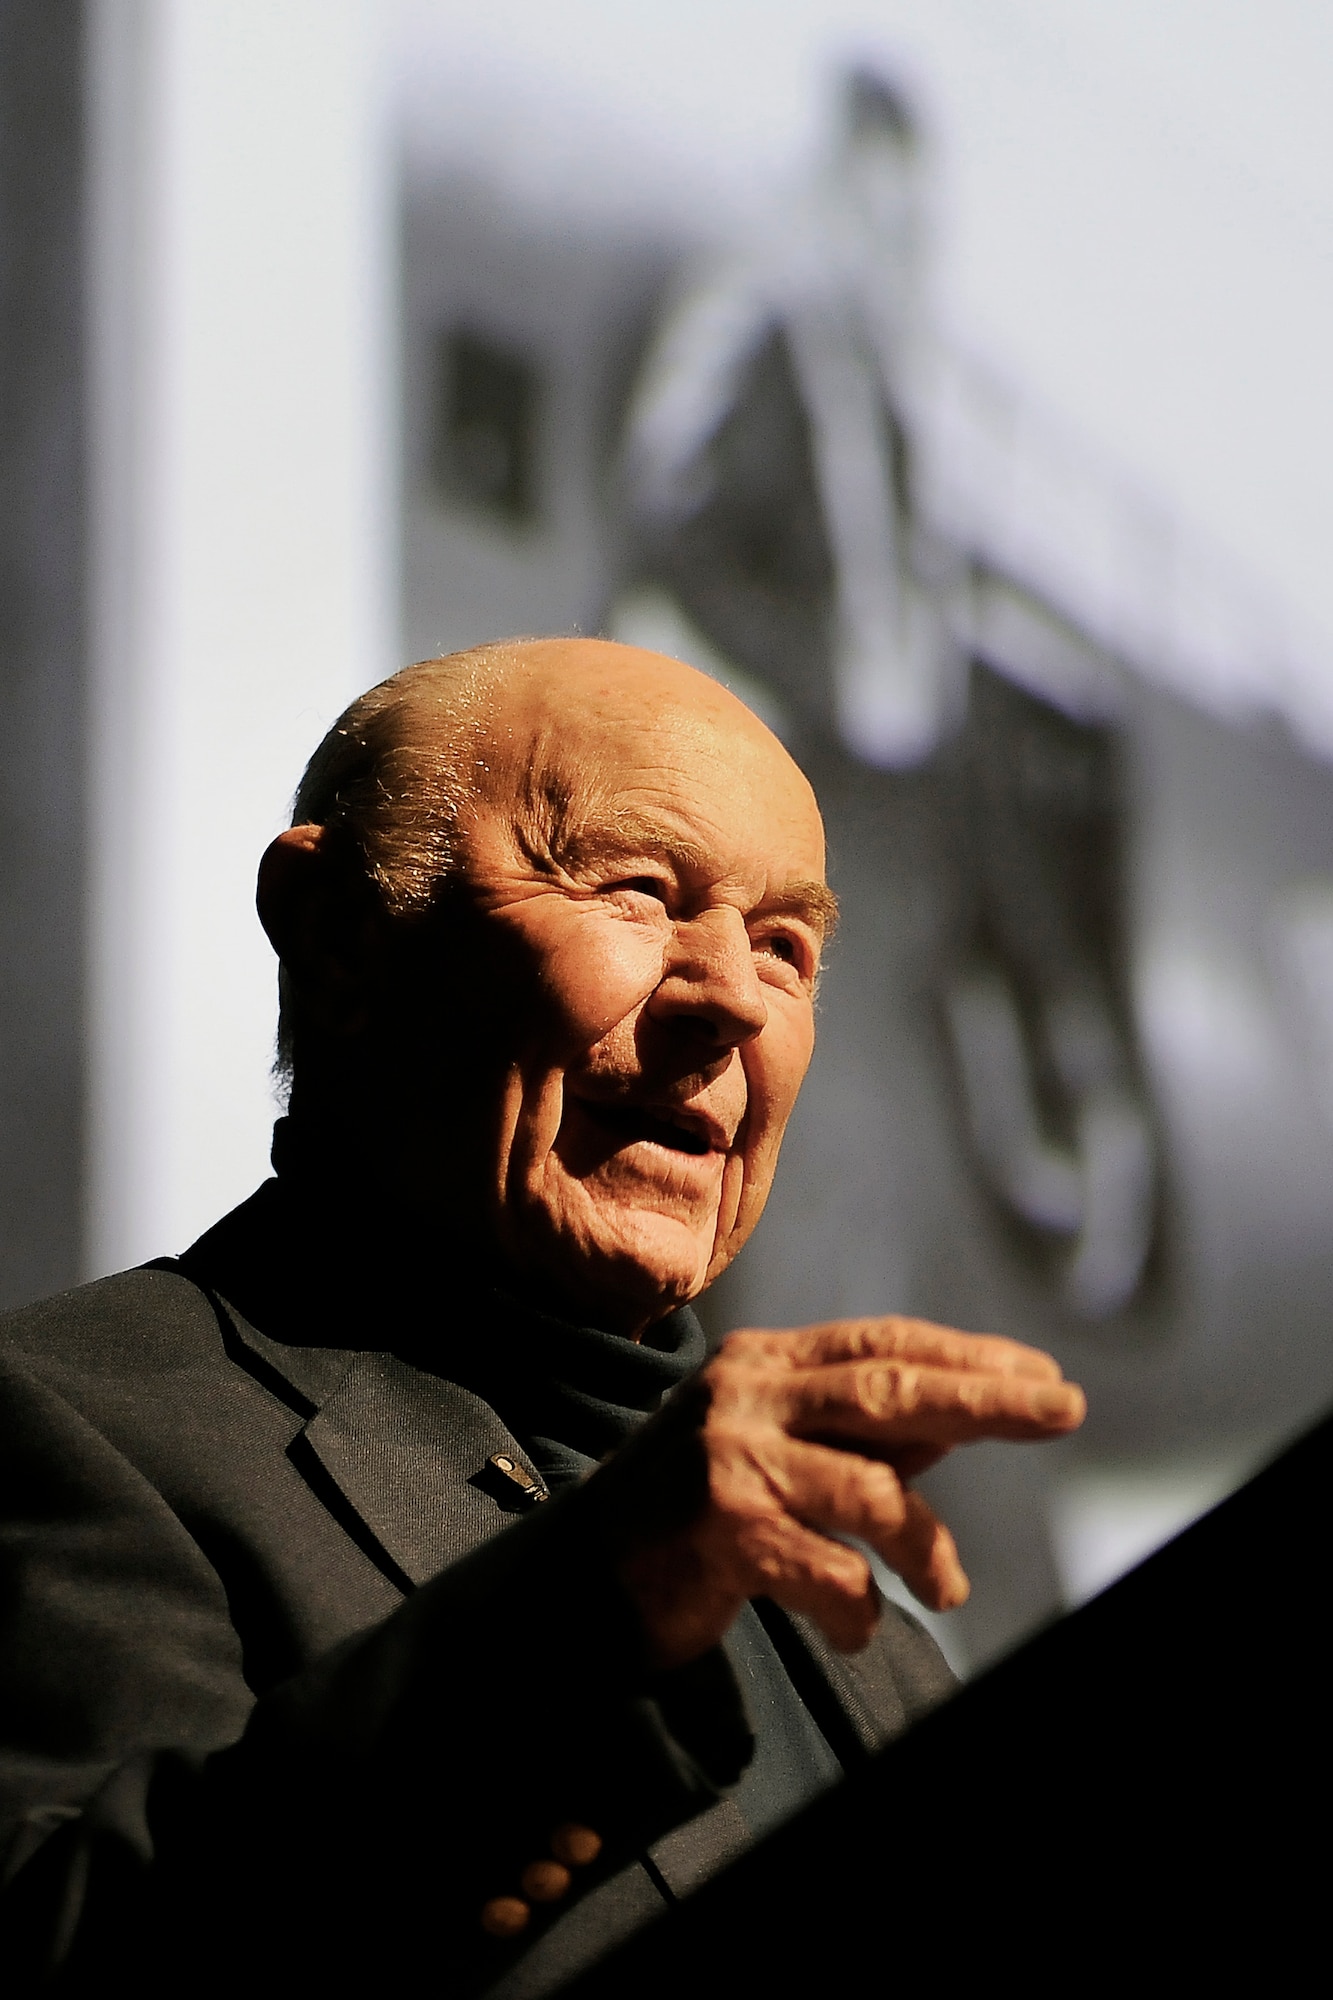 Retired Brig. Gen. Chuck Yeager speaks at the Air Force Academy's National Character and Leadership Symposium Feb. 22, 2013. Yeager, the first person to break the sound barrier, served in the Army Air Corps for six years and in the Air Force for 28 more. (U.S. Air Force photo/Mike Kaplan)